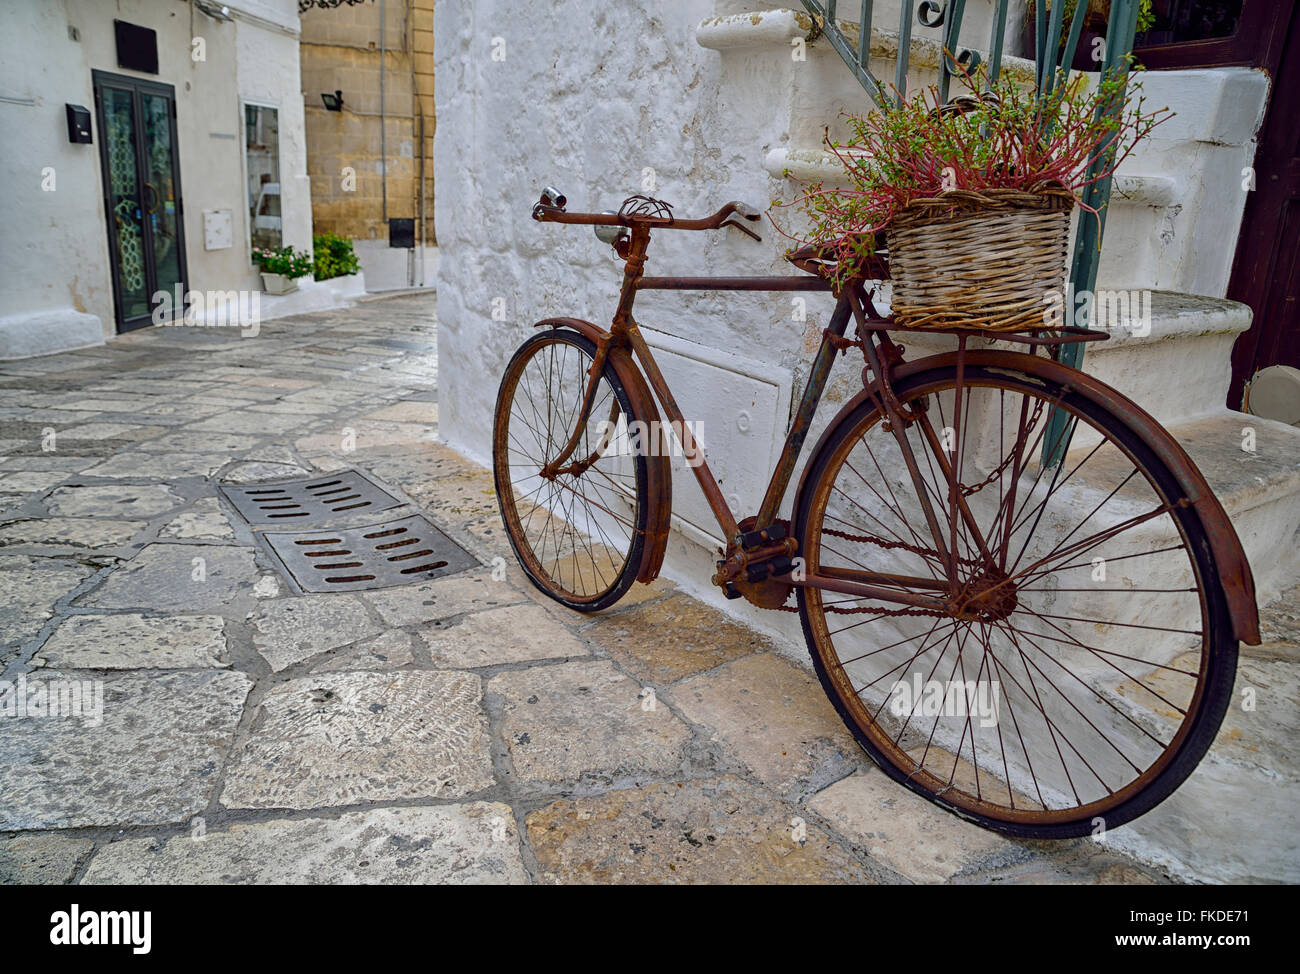 Old rusty bicycle with flower basket by steps Stock Photo